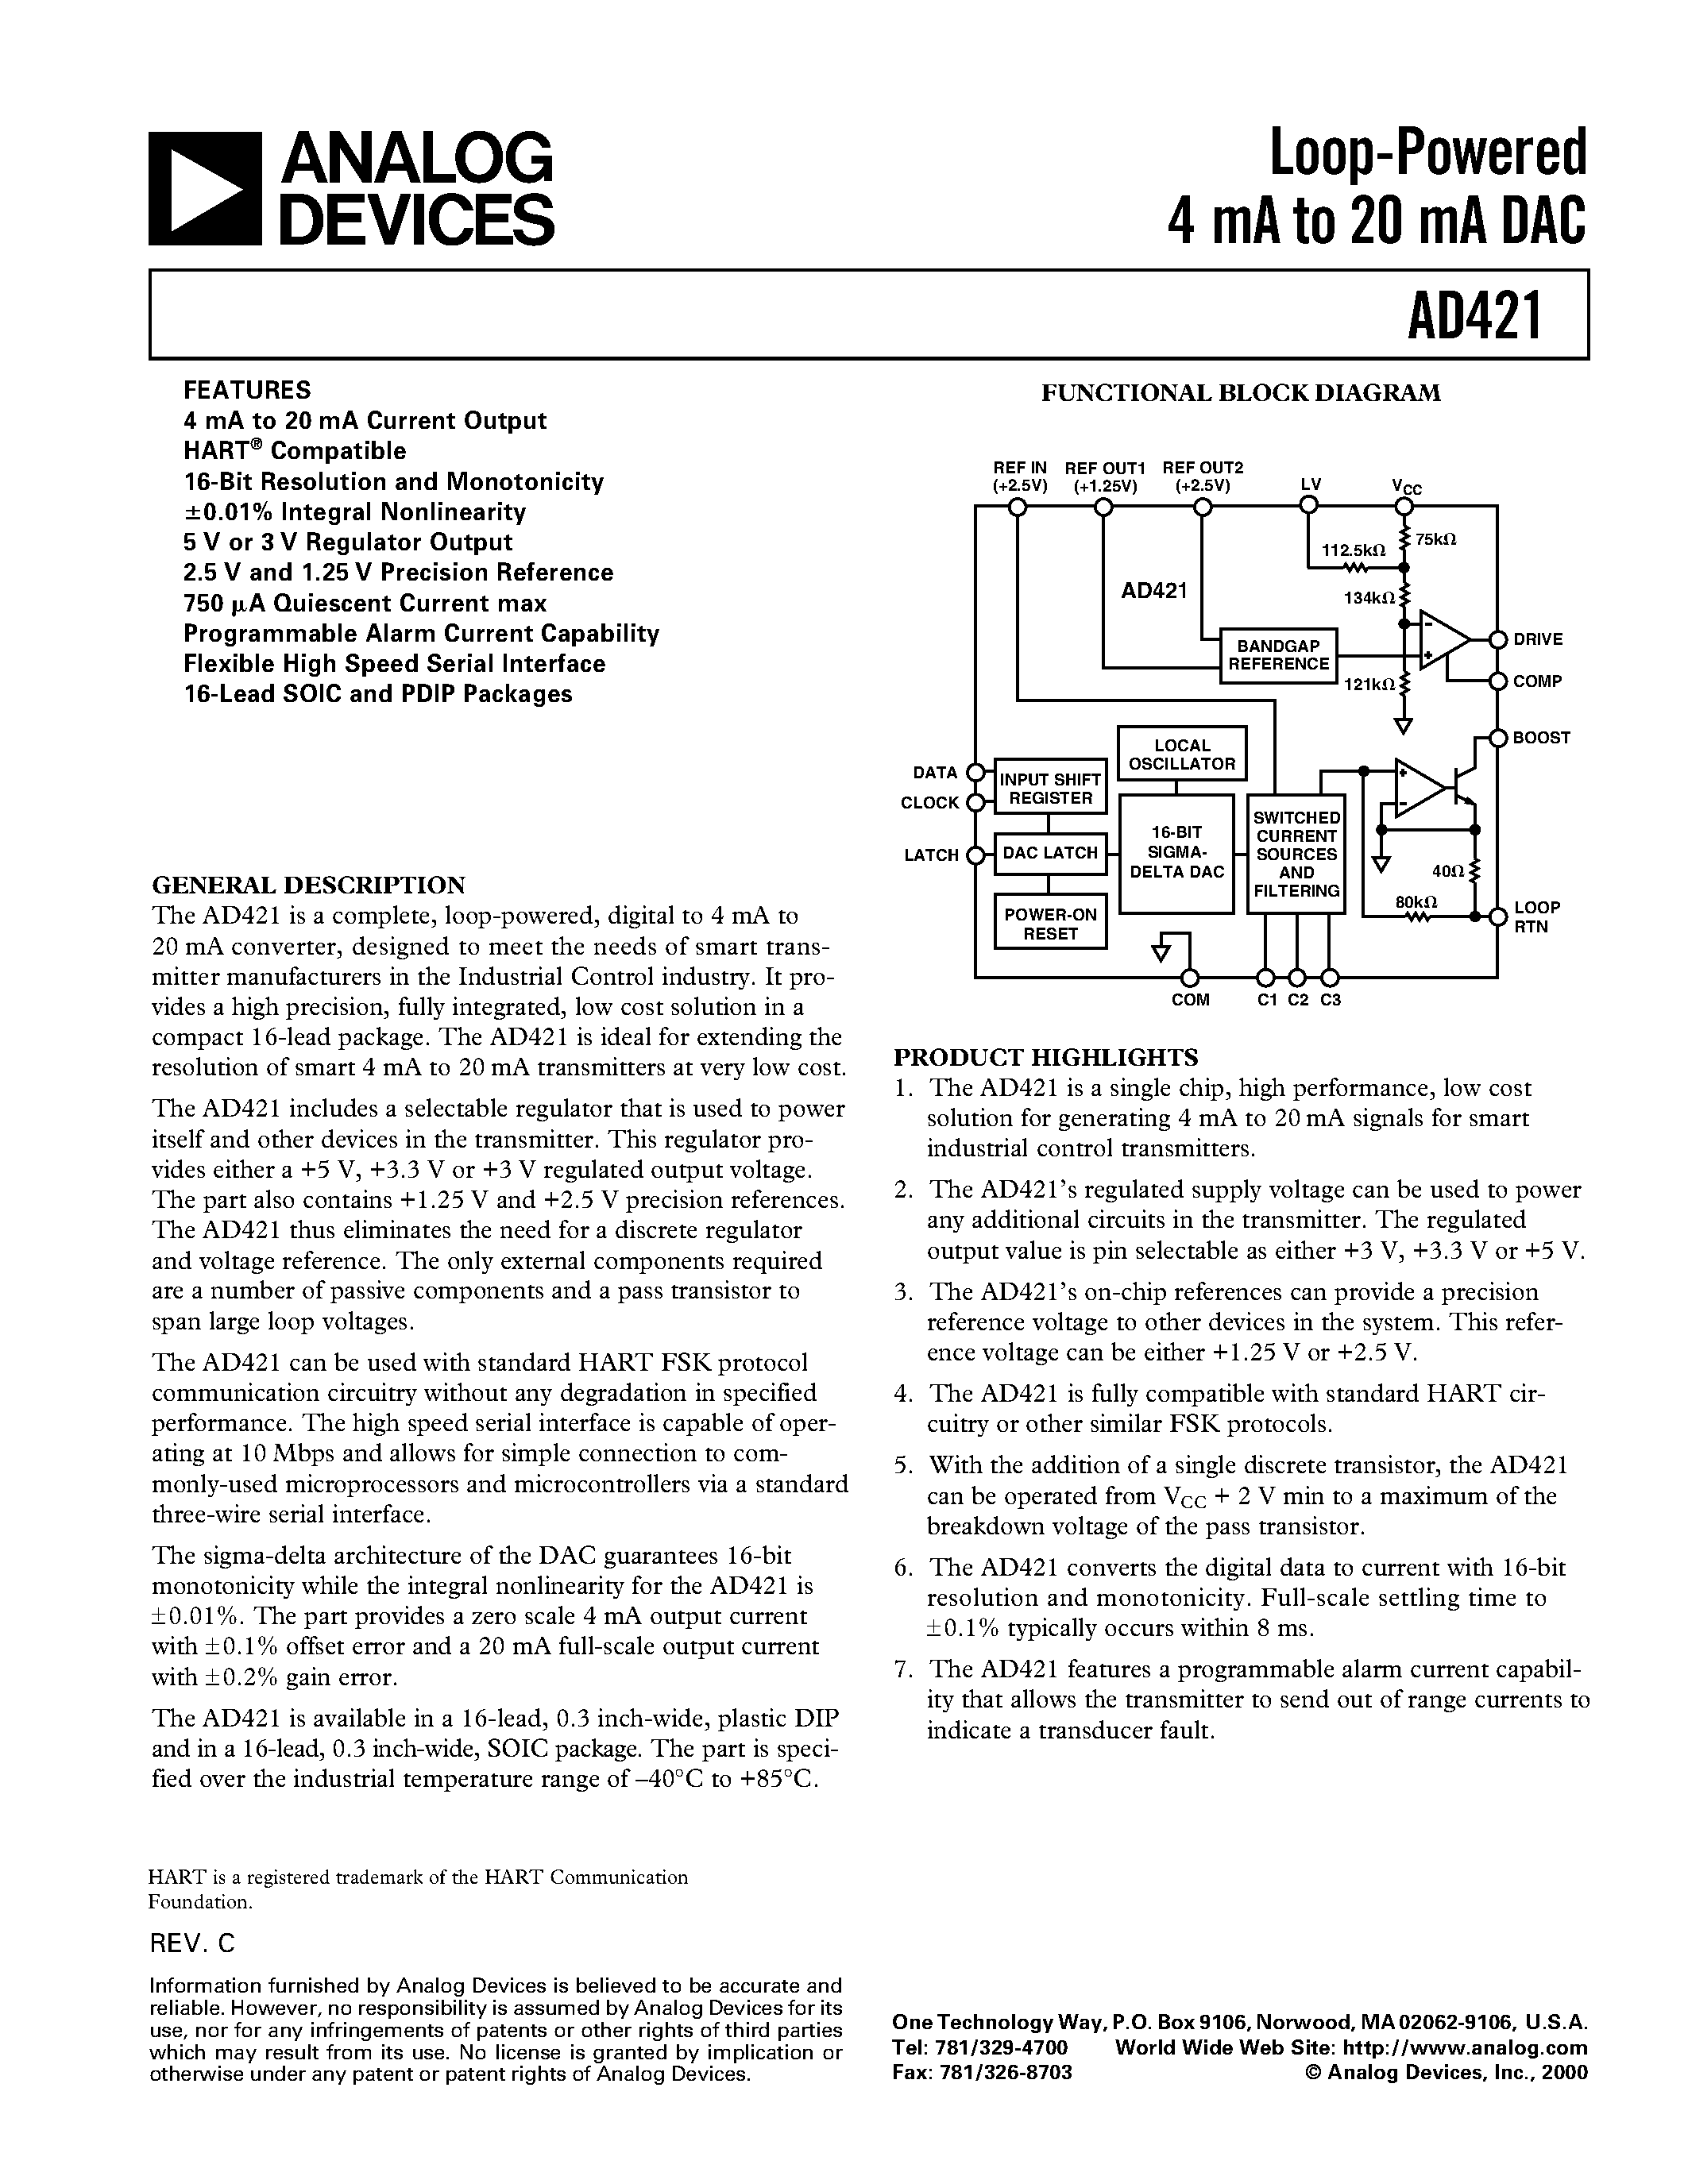 Datasheet EVAL-ADF4213EB1 - Evaluation Board For PLL Frequency Synthesizer page 1